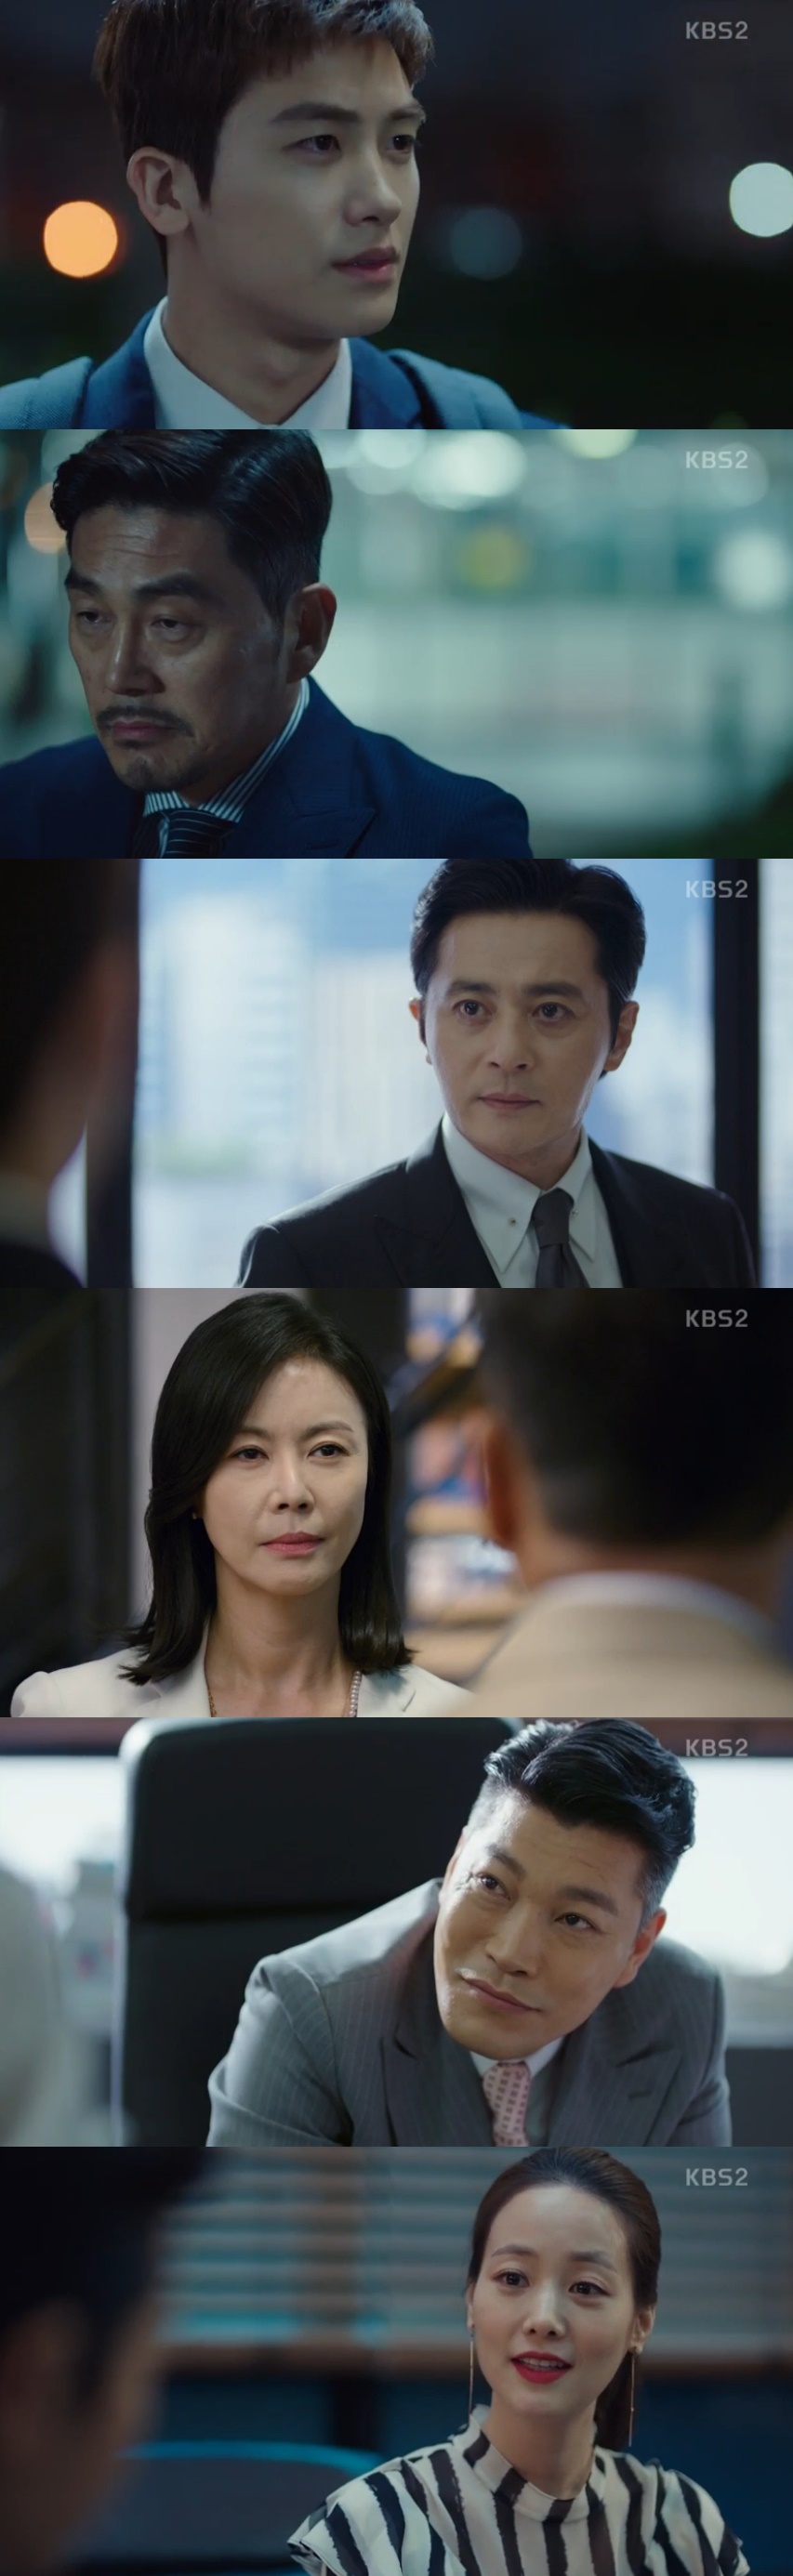 With the advent of Suits Kim Yeong-ho, Jang Dong-gun and Park Hyeong-sik were in conflict.On the 31st KBS2 drama Suits, the appearance of Kim Young-ho caused a sense of crisis in the relationship between Choi Kang-seok and Park Hyeong-sik.In the previous broadcast, Choi Kang-seok threatened Ham Ki-taeks Come back by catching his embezzlement and affair weakness.In the past, Ham Ki-taek left the Law Firm because he was afraid of an affair with his wife, and after his wifes death, he tried to back the Come, but Choi Kang-seok threatened to inform his daughter again.However, on the same day, Ham Ki-taek went to Kang & Ham and said in front of all employees, I committed embezzlement two years ago.I want you to see how youve changed after youve been through reflection and atonement. Choi Kang-seok then took Ko Yeon-woo to his room.After that, Ham Ki-taek told Kang Ha-yeon (Jin Hee-kyung) and Choi Kang-seok, I told my daughter everything about embezzlement and scandals.No matter what you do, you will not be forgiven by your daughter, he said, declaring war on Choi Kang-seoks threats.On the other hand, Kang Hae-yeon urged Choi Kang-seok to release Ko Yeon-woo, saying, Since you have not prevented the back of the ship, send the assort.But Choi said, The fact that Ham backed up so quickly is that he has already prepared, and he knows our weaknesses.He added, You need me, and I need a talented Aso. He added, I will need a fight and a fight soon.When asked about Ham Ki-taek, Choi Kang-seok compared Ham to a salmosa that eats his mother, when Ko Yeon-woo asked him not to confront Ham Ki-taek as much as possible.Choi explained that he was the one who cut the fleet table from Kang & Ham, saying, I came to revenge on me. Ko Yeon-woo was anxious that his fake lawyer status would be a weakness for Choi Kang-seok.Choi said, You are not my weakness. Do not worry because you are not a weakness.Meanwhile, Choi Kang-seok and Ko Yeon-woo took charge of the nursing hospitals nurse strike, but the court dismissed the application for a strike injunction, saying, There is not enough evidence that the hospital has suffered losses.So Choi Kang-seok had doubts about the judges expression.At the same time, Ham Ki-taek took full control of Law Firm. Chae Geun-sik (Choi Ki-hwa) was the first to stand on the line of Ham Ki-taek.Choi said to Kang Hae-yeon, Is not it a throwaway anyway? However, Kang Hae-yeon said, At some point, the most unfortunate vote may be the most unfortunate.Kim Moon-hee (Son Yeo-eun) also stood in line with Chae Geun-siks displeasure.I backed up, but nothing changes, Ham said at the Law Firm meeting, and Kang is the first, and I am the second. You can think of it as the back-room grandmother.After that, Ham Ki-taek said, I will solve it soon, about Choi Kang-seoks hospital nurse strike agenda.Choi Kang-seok looked at Ham Ki-taeks behavior and found the answer in a meaningful smile made by the judge at the time of the injunction.After that, Choi Kang-seok declared to Kang Hae-yeon, I have to give it back because I have been hit by one shot. He caught up with Ham Ki-taek and warned him about his golfing with the judge.In addition, Choi Kang-seok pressed the hospital unions nurses to close their workplaces with cards, and he was disappointed with the appearance of Choi Kang-seok, who did not think about patients at all.In the meantime, Ham Ki-taek visited Ko Yeon-woo and said that Choi Kang-seok praised him a lot and told him to persuade the nurse, the union chairman.Ko Yeon-woo made the nurse meet again and continued the negotiations, expressed satisfaction, and informed and embraced Kim Ji-na (Go Sung-hee).However, it was revealed that Ham Ki-taek had separated Ko Yeon-woo and Choi Kang-seok, who visited Ham Ki-taek and told him that the hospital management demanded a reduction in personnel, stressing that the crisis caused the crisis in Kang & Ham.Choi Kang-seok then announced that nurses were dismissed for more than five years after hearing the information that there was a culture of burning in a nursing hospital through Ko Yeon-woo.Choi Kang-seok said that Ham Ki-taek deceived Ko Yeon-woo while he was embarrassed.However, Ko Yeon-woo expressed betrayal that Choi Kang-seok used him rather than Ham Ki-taek, saying, I do not want to play with the emotional fight anymore.